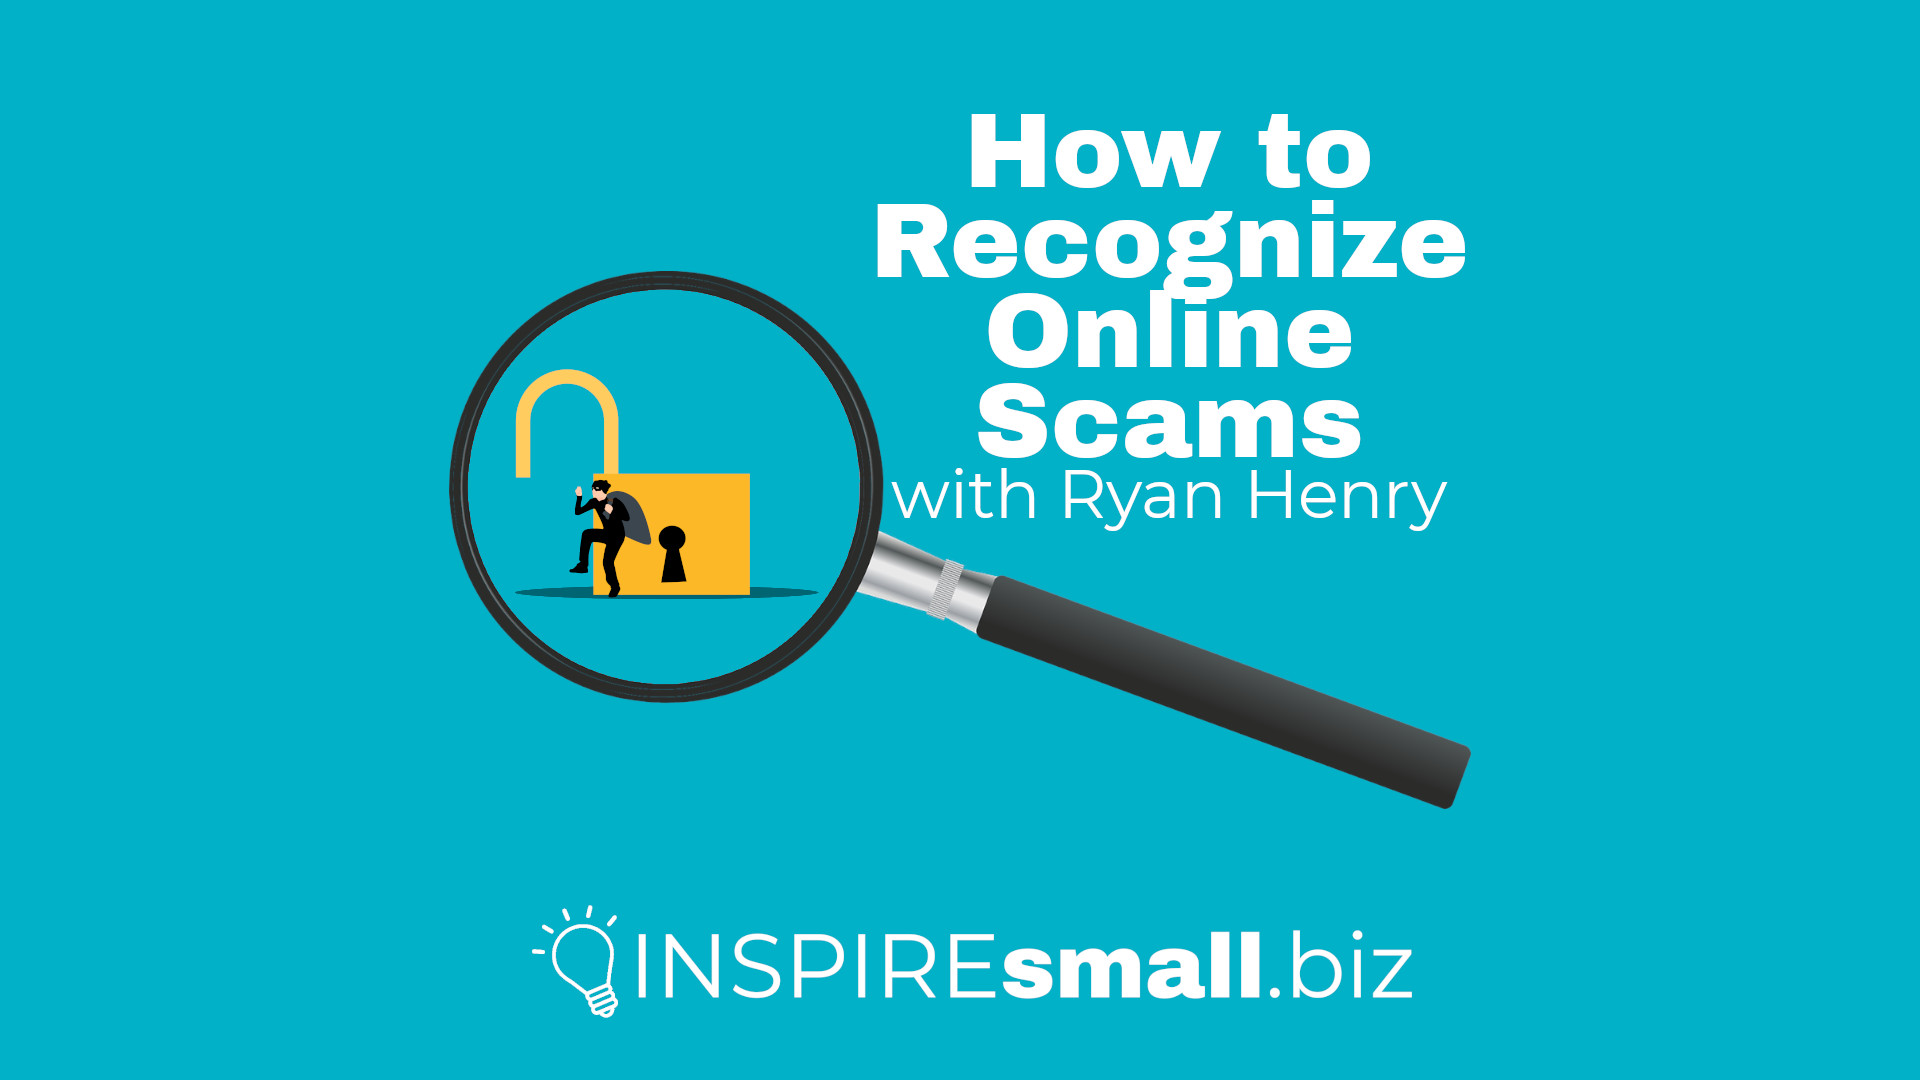 How to Recognize Online Scams